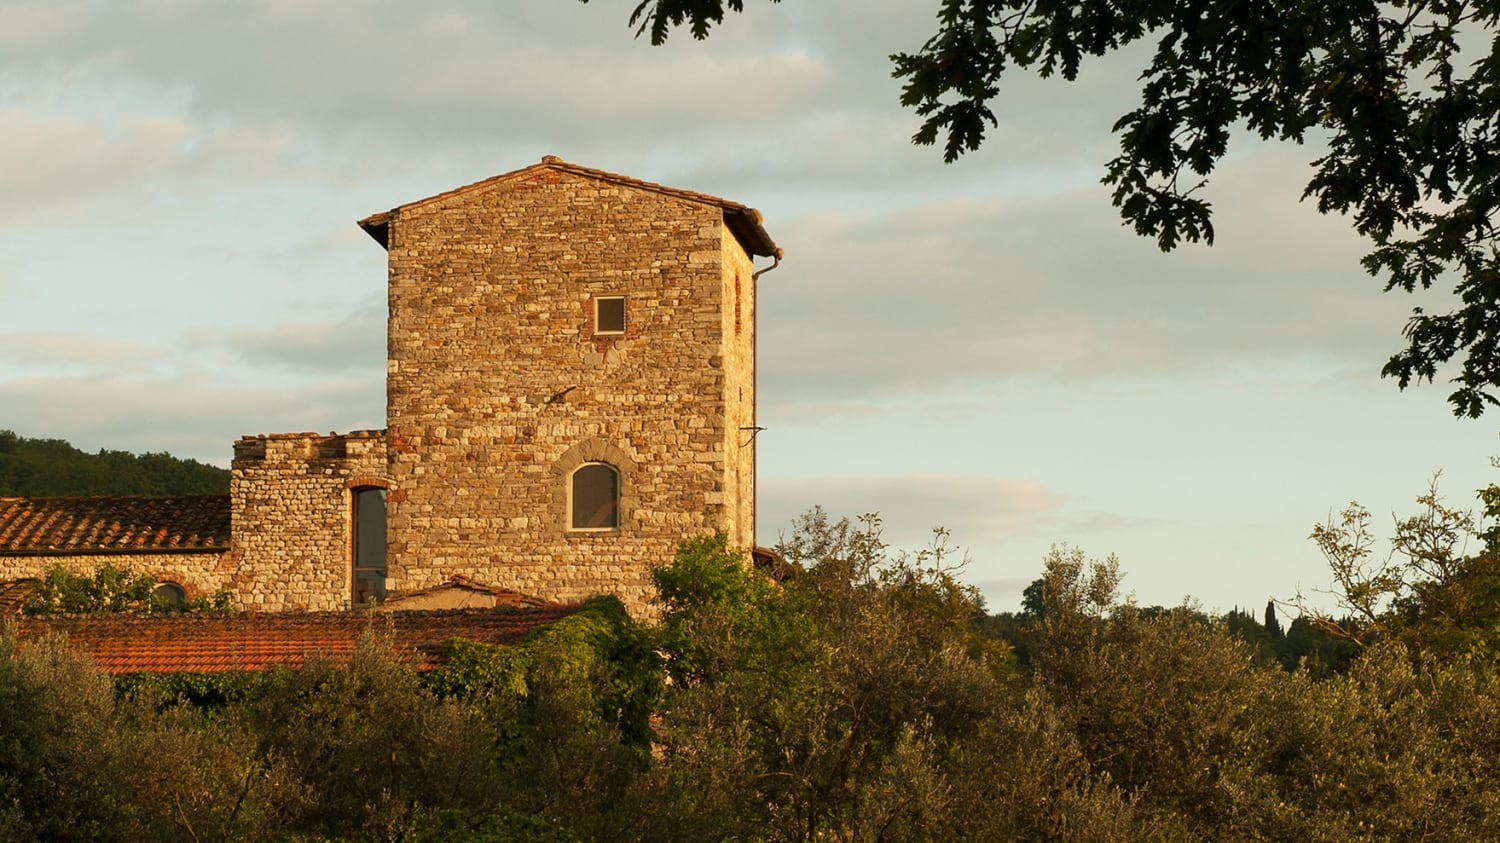 The late architect Bruno Sacchi's medieval tower in Florence